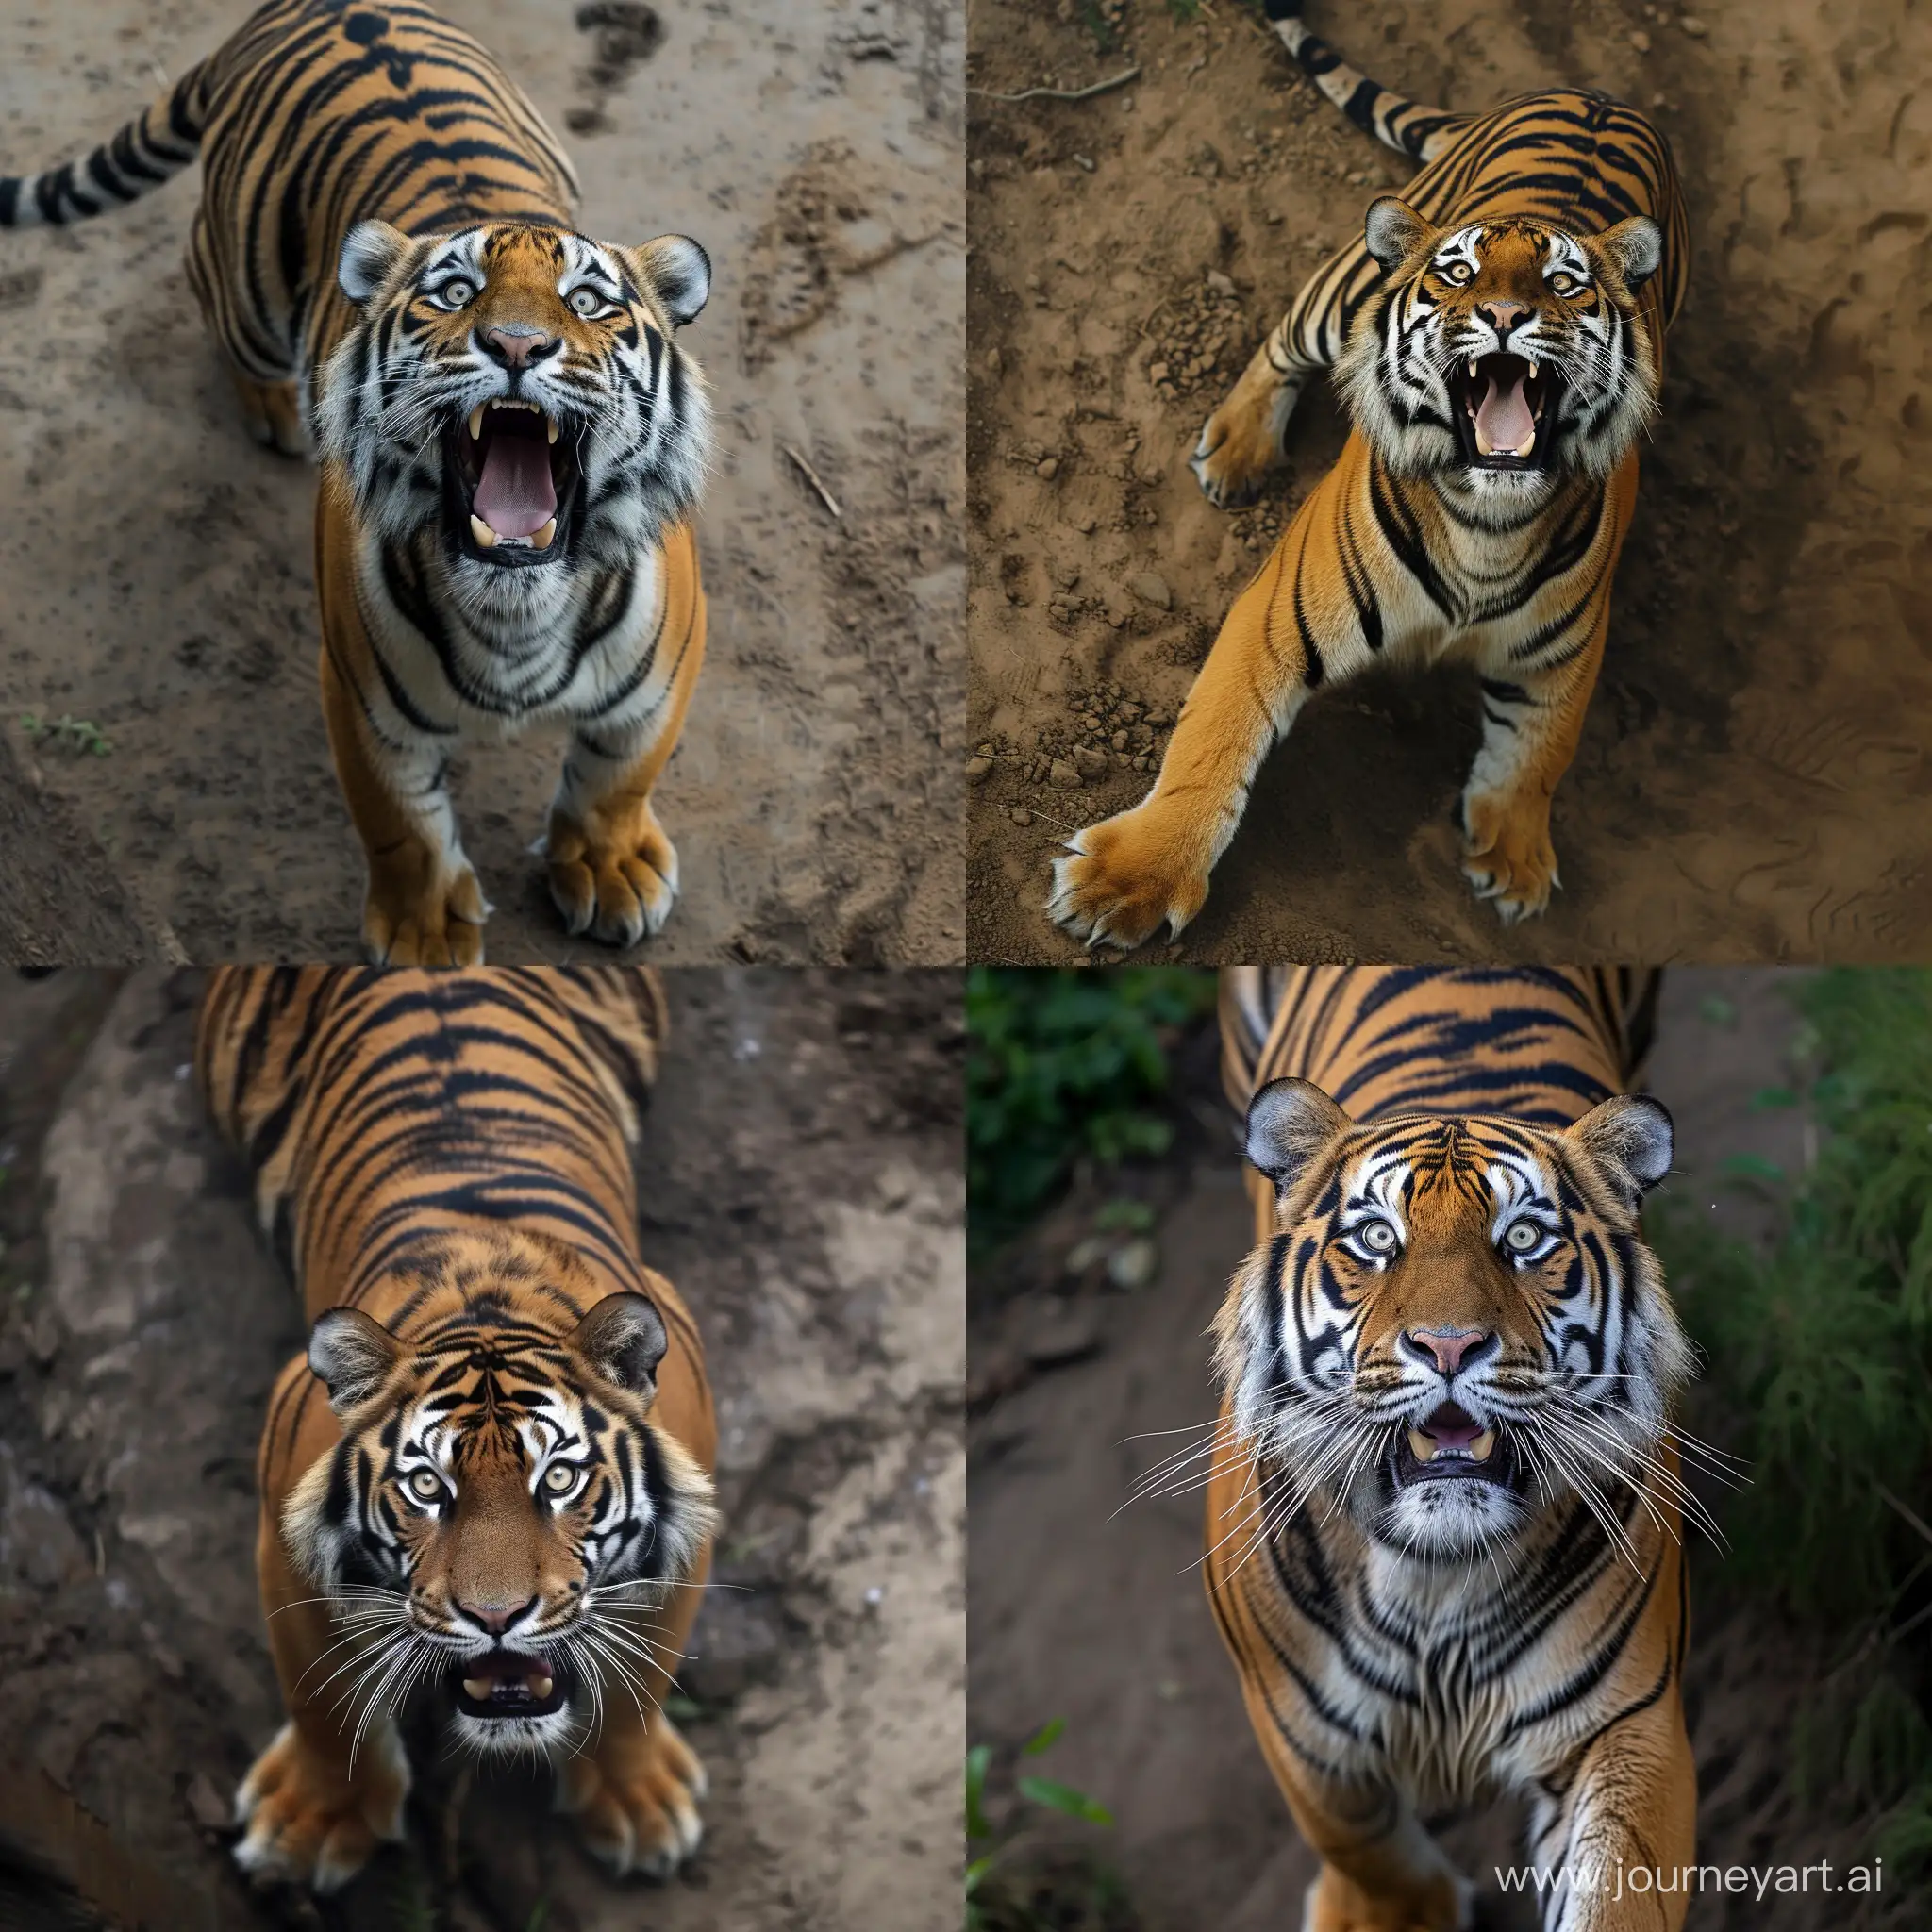 Stealthy-Tiger-Roaring-in-TopView-Wildlife-Capture